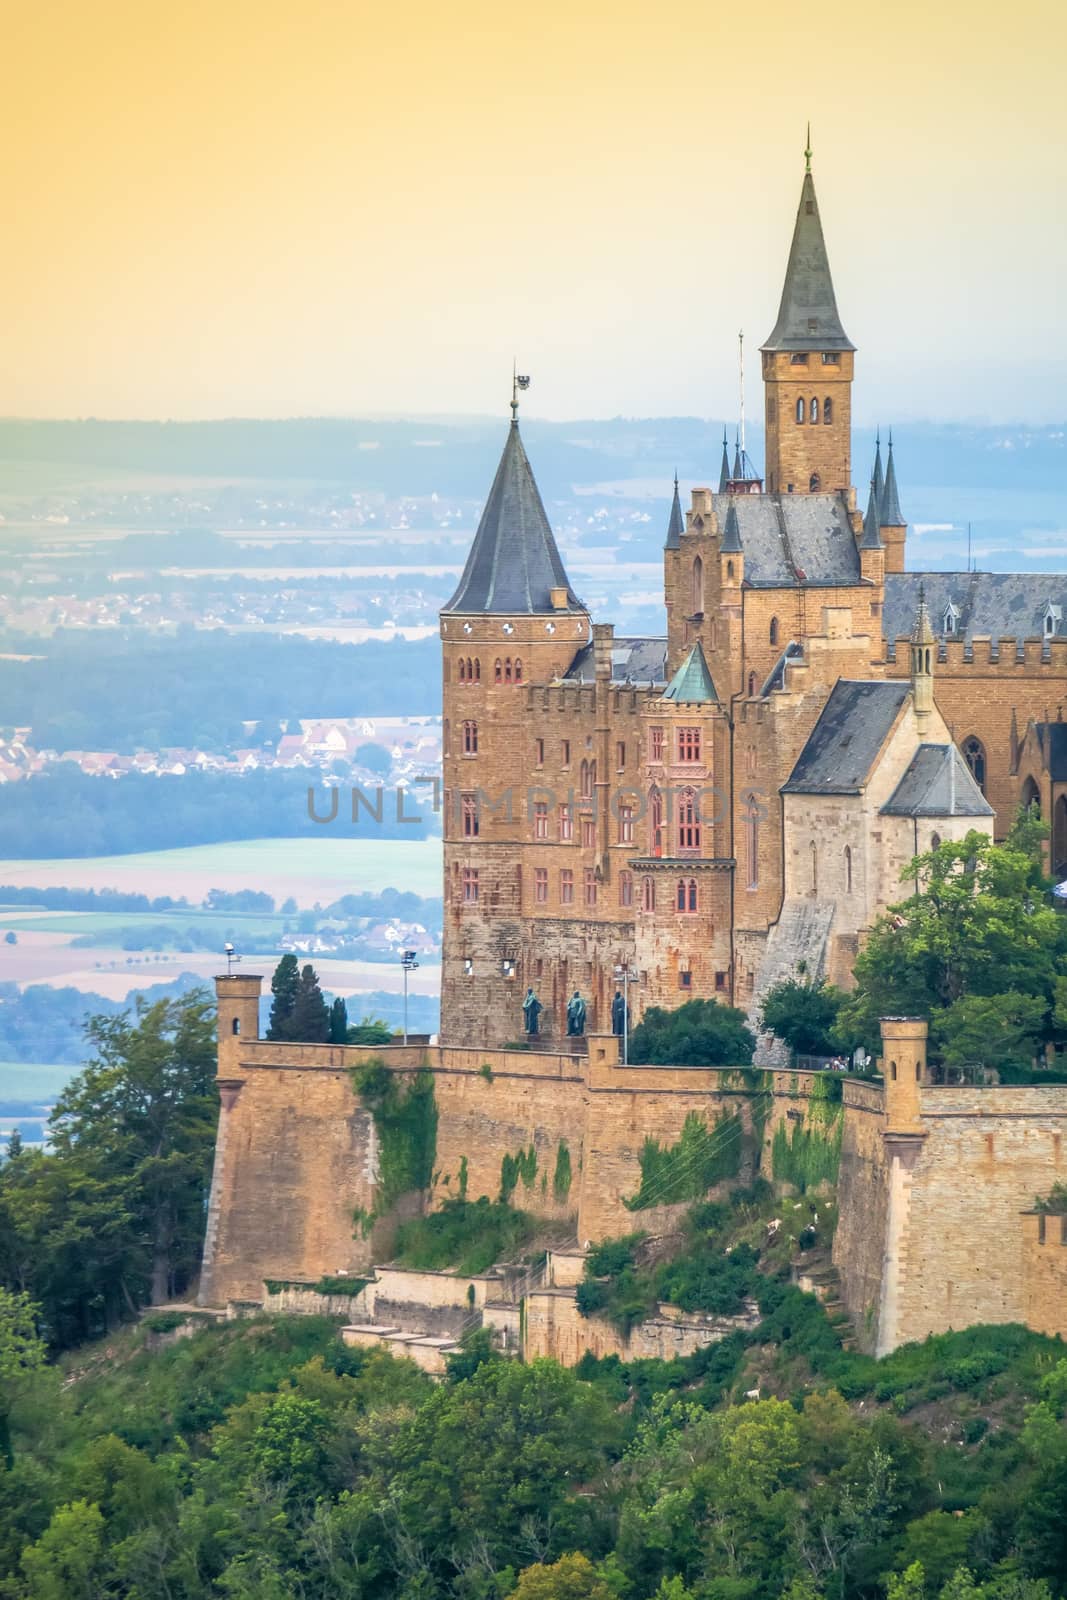 An image of the Castle Hohenzollern in south Germany